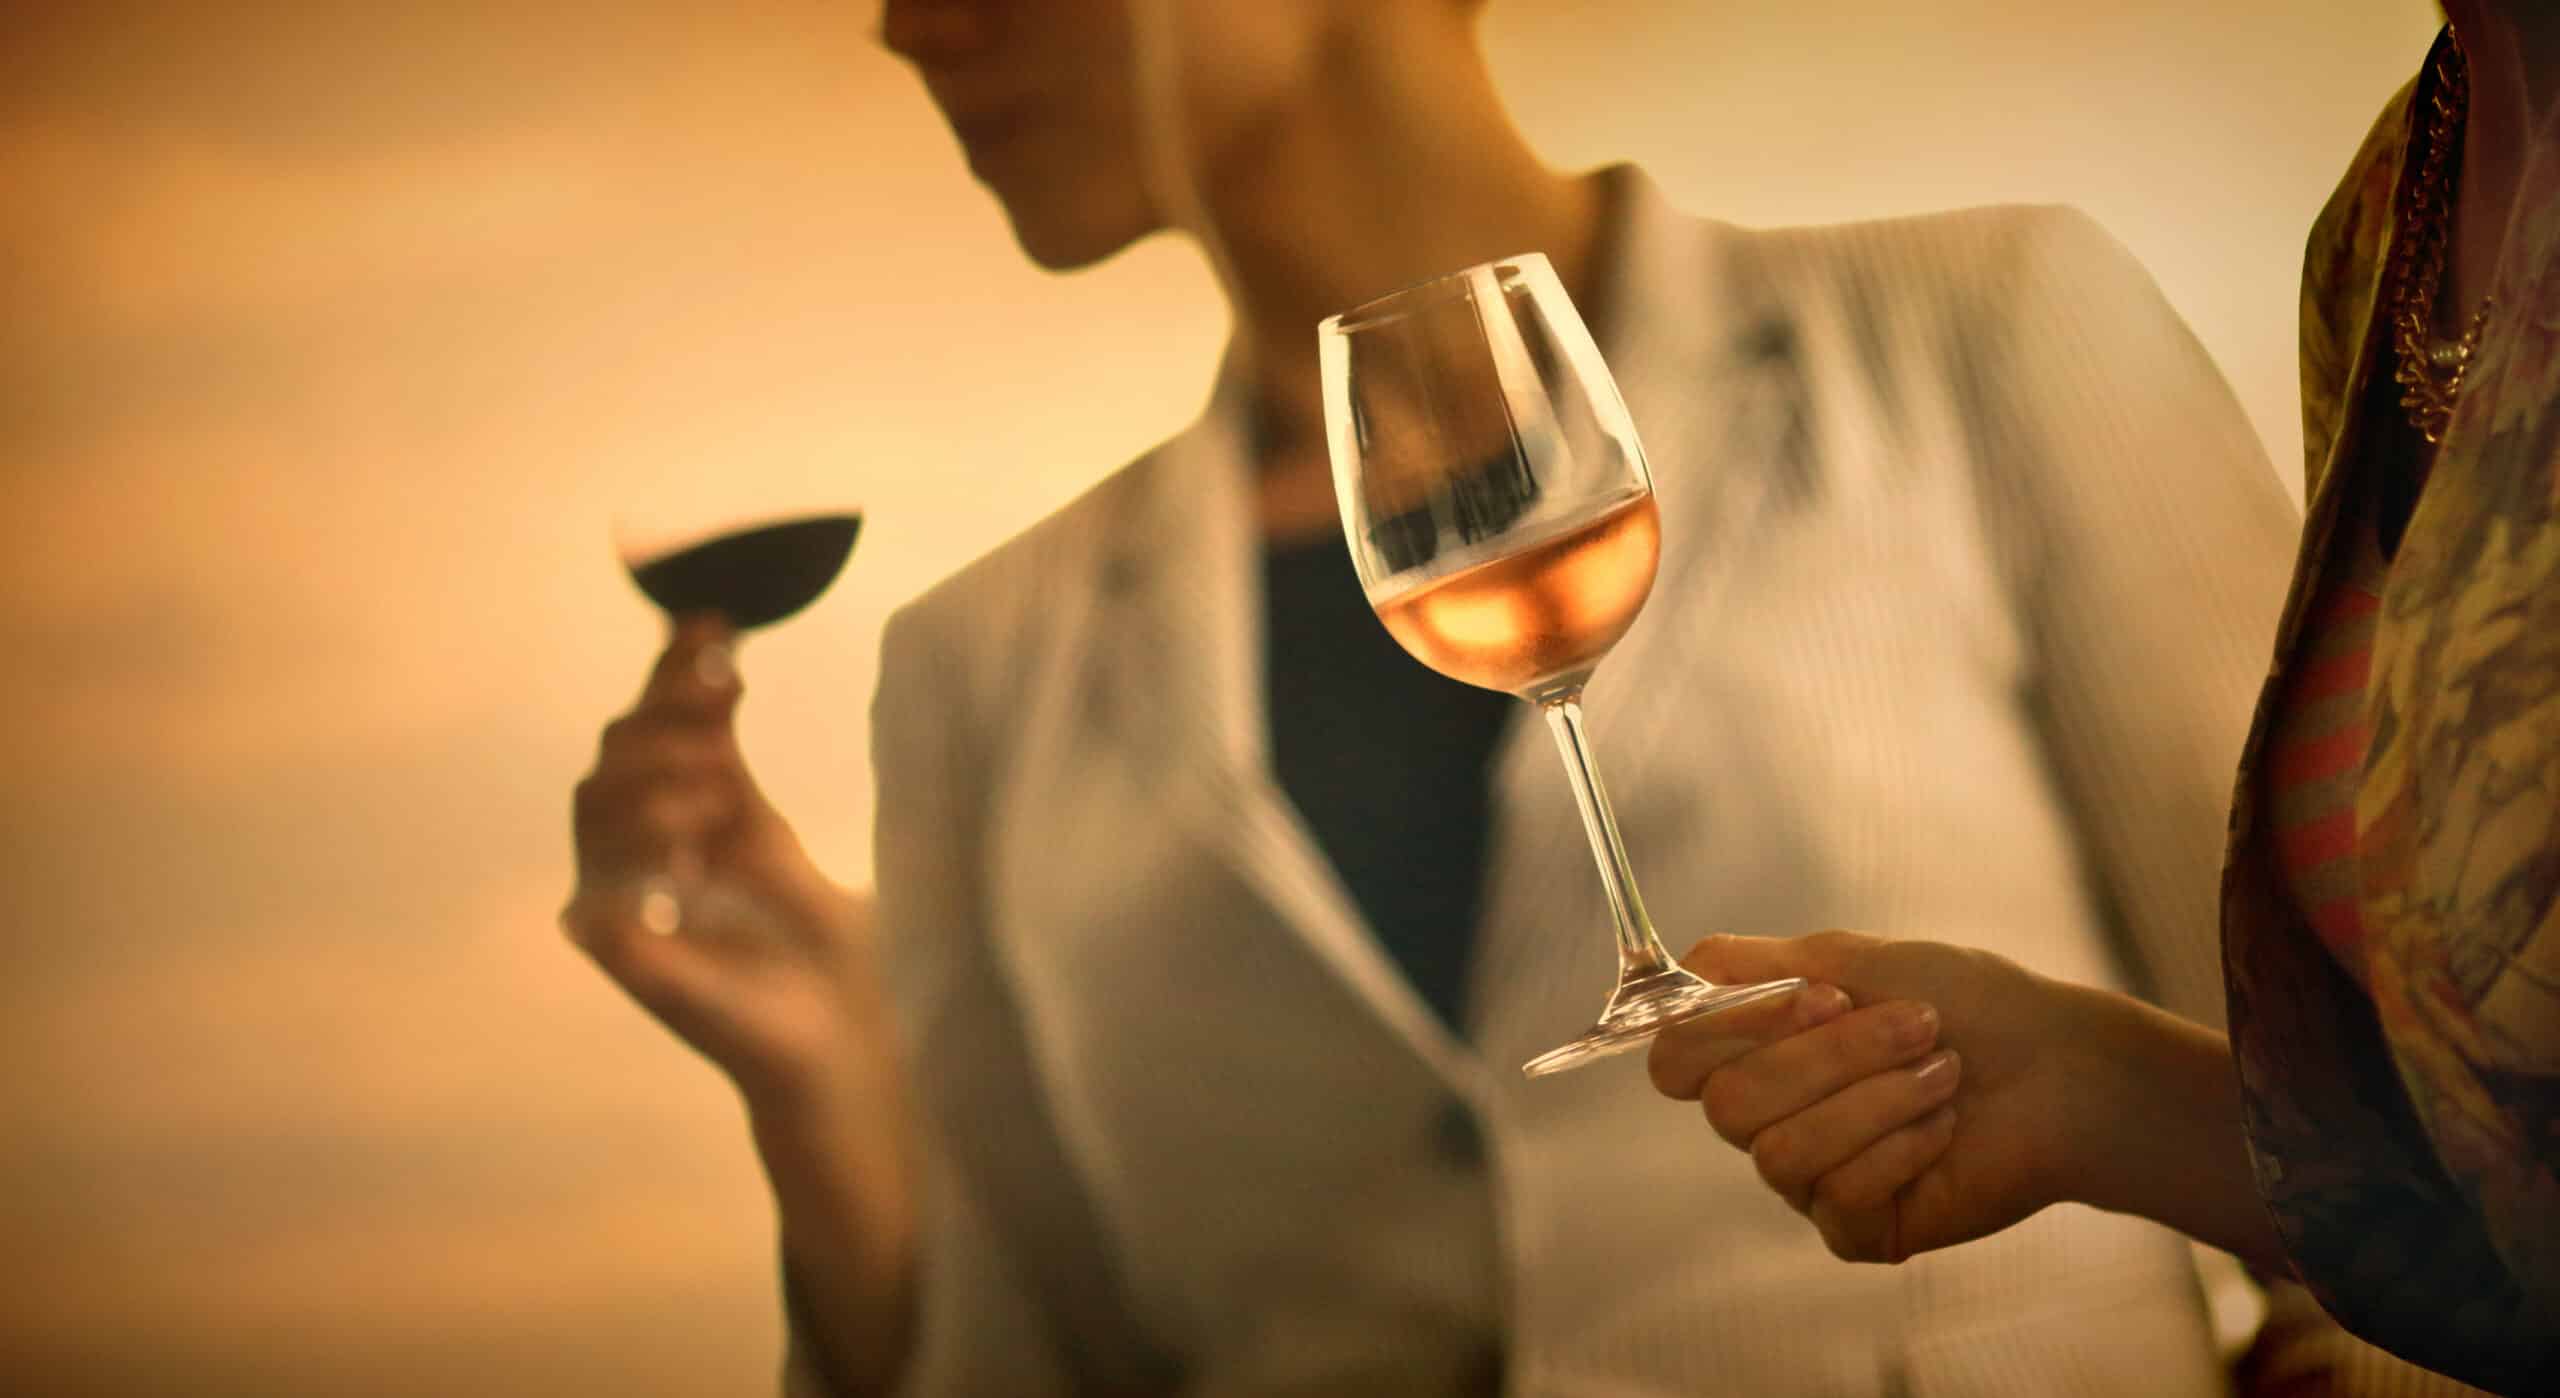 Group of unrecognizable women tasting wine . Comparing appearance, smell, aroma,t aste, aftertaste, holding wineglasses on the stems.The closest person to he camera is in focus is holding a glass of red wine and looking at its color. It's summer sunset, image is orange toned.